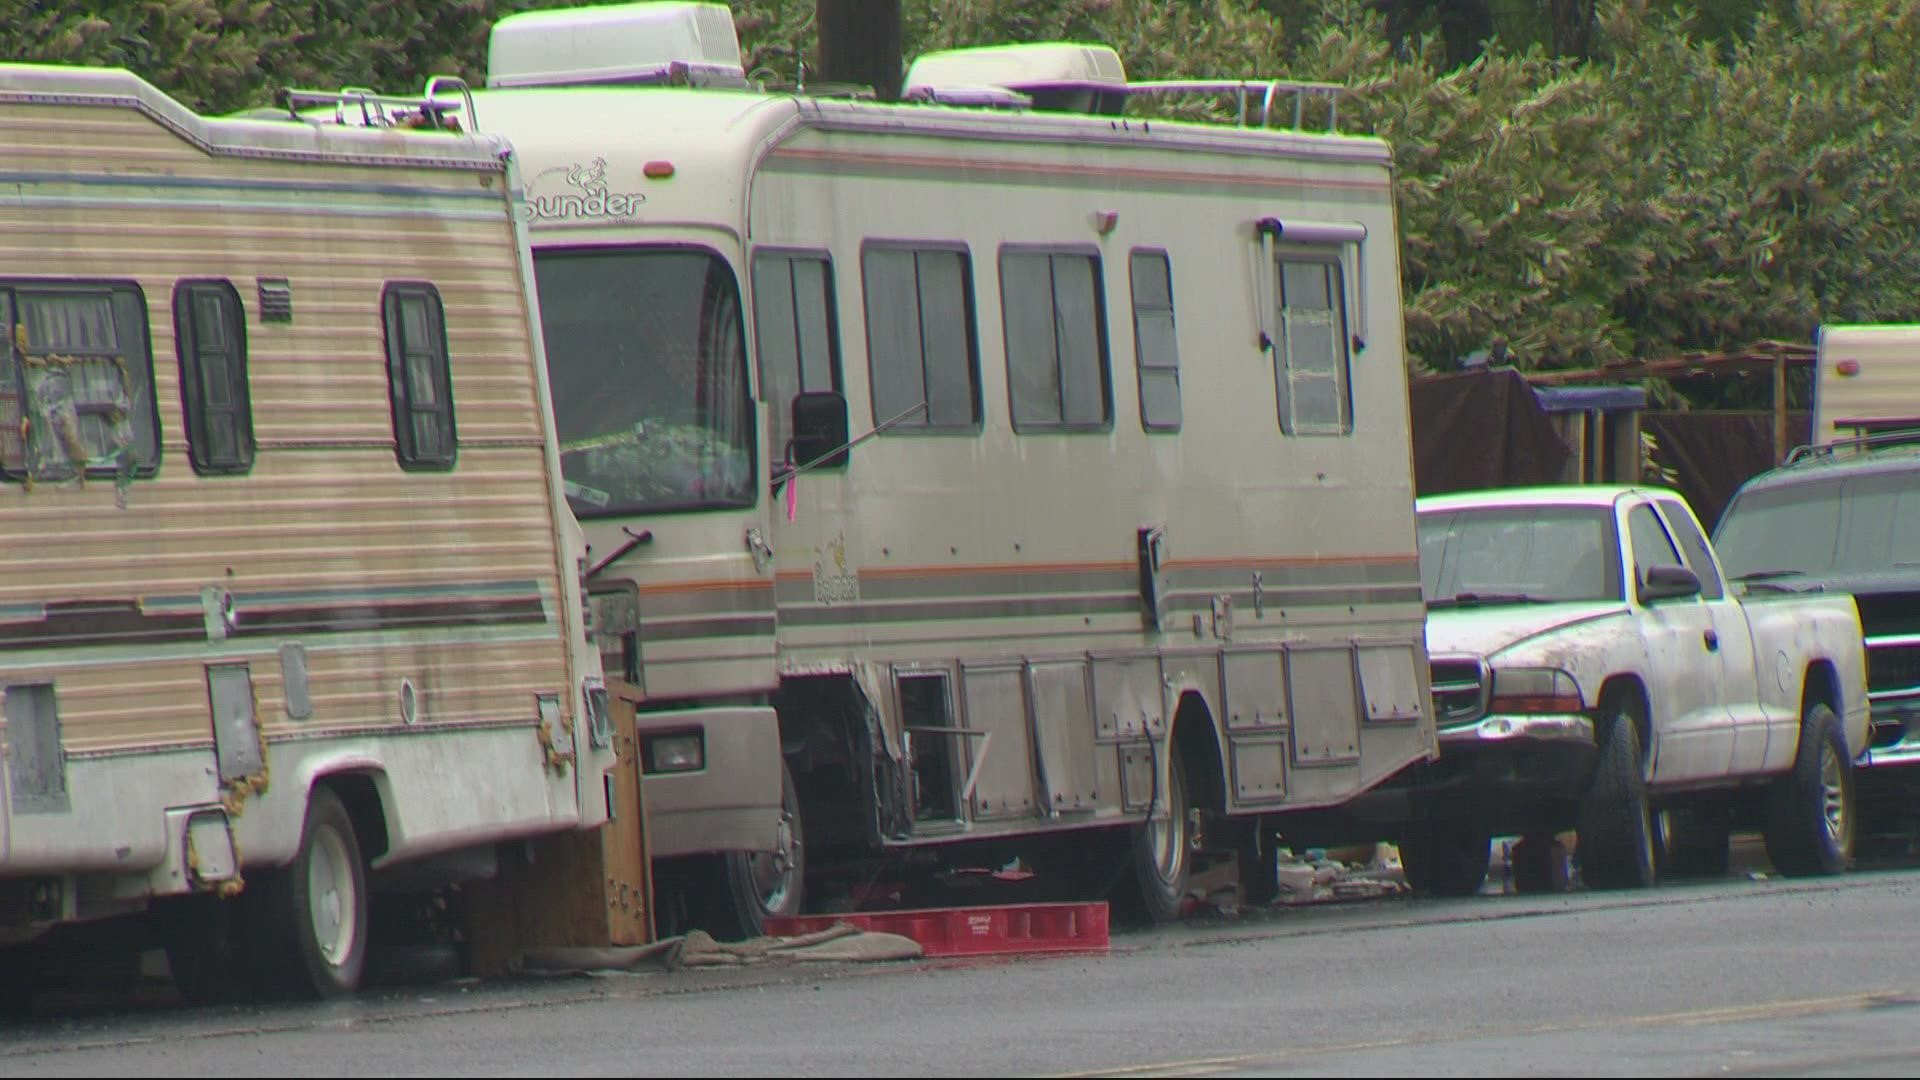 Police said someone in a moving truck tossed an explosive under an occupied RV in Northeast Portland. The woman inside was not injured.